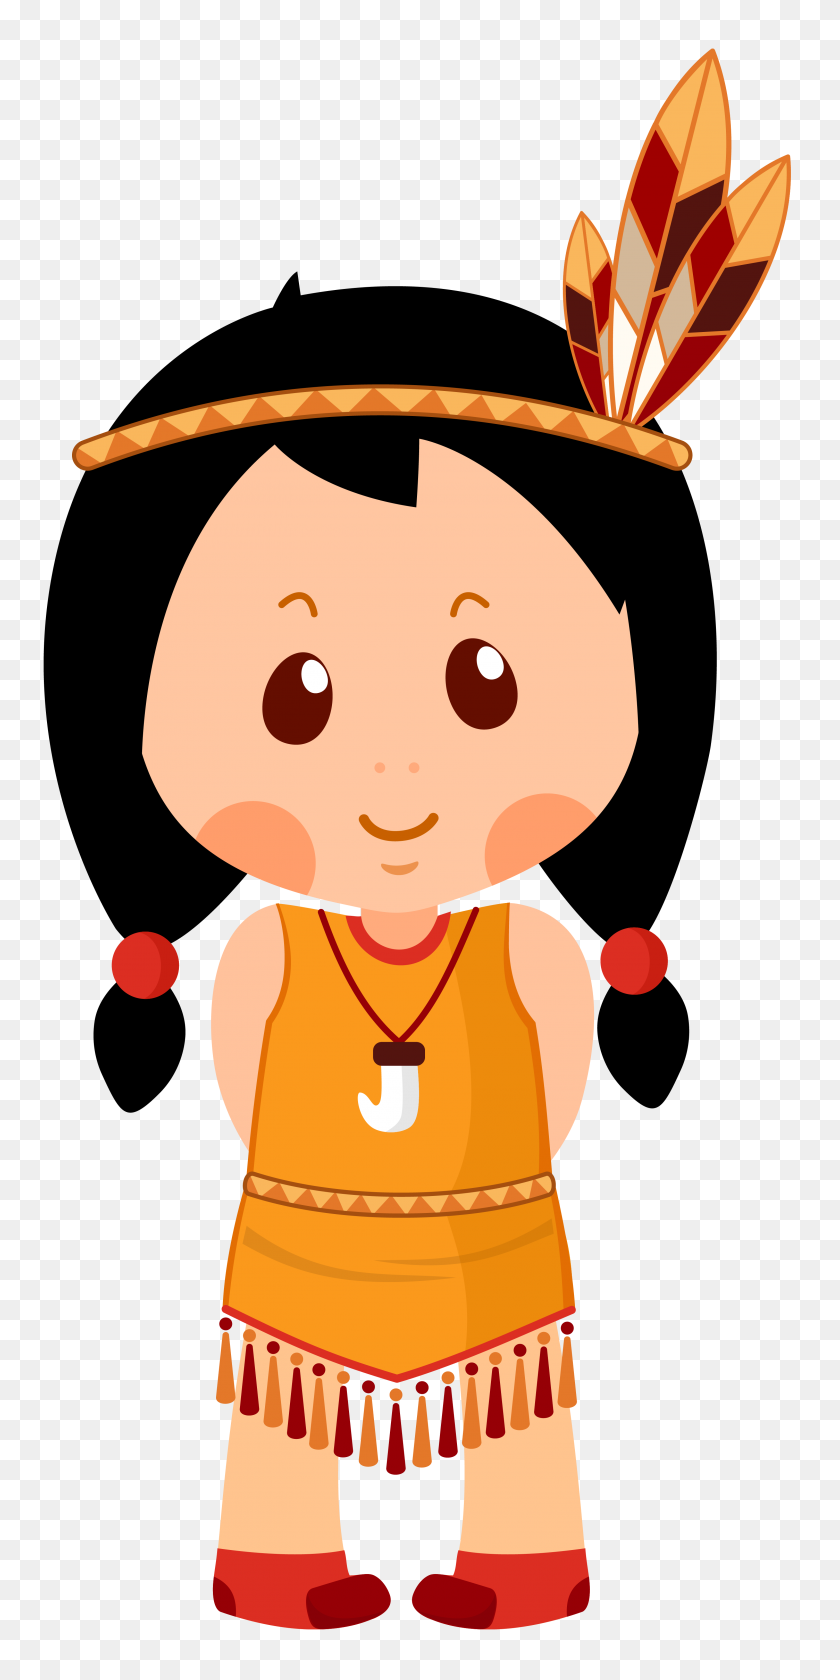 3027x6287 Lndian Clipart People - Indian Spear Clipart